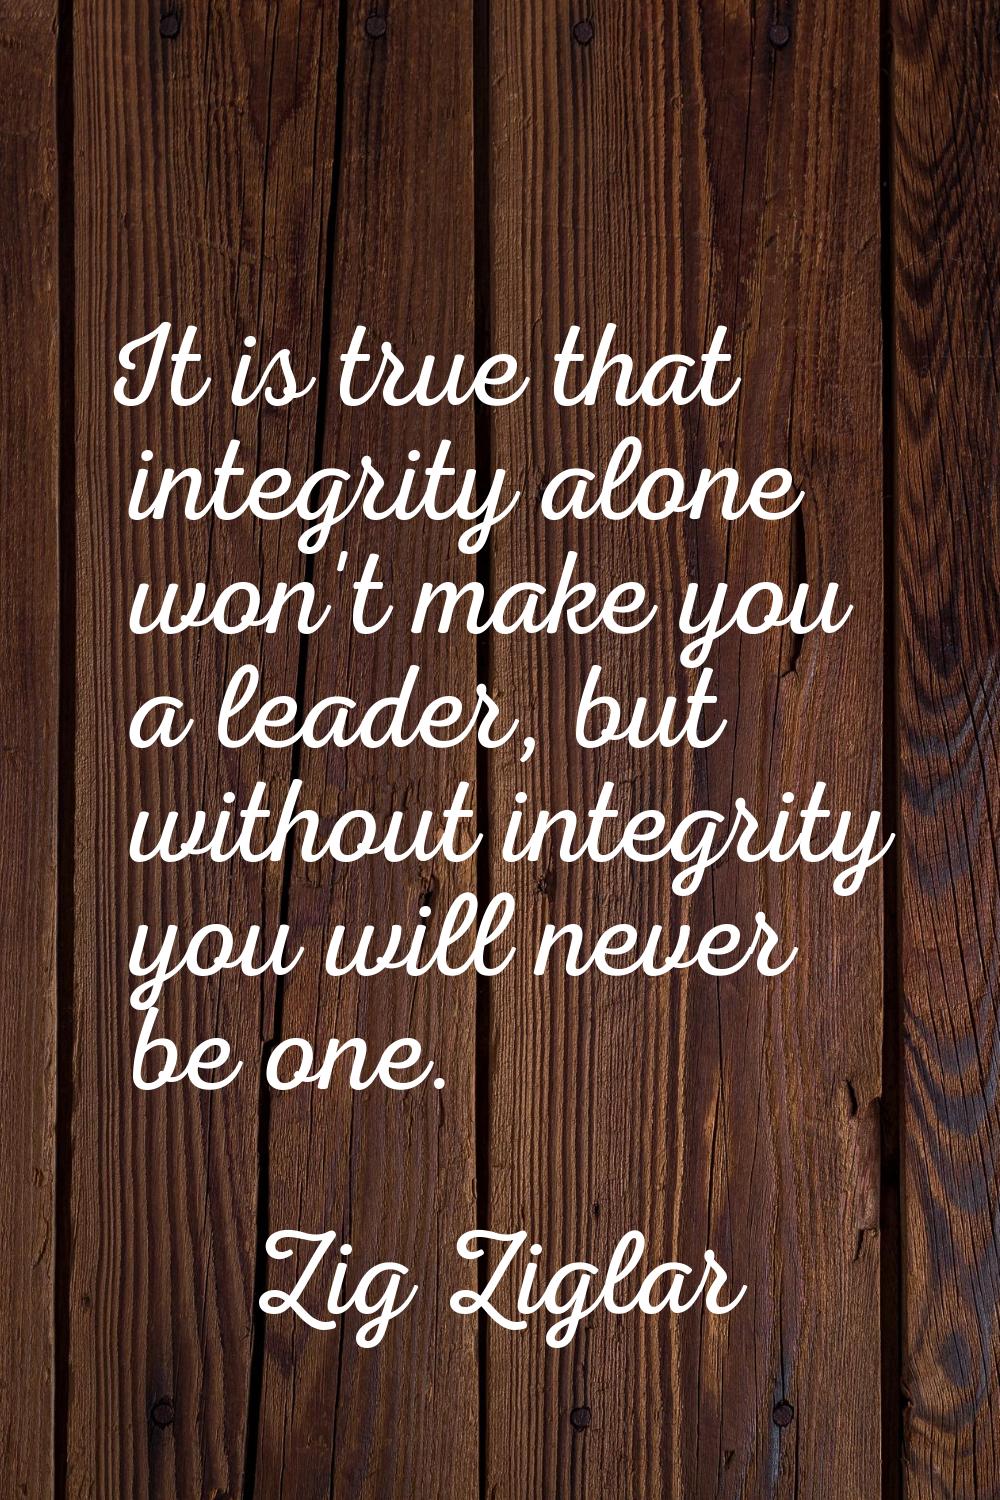 It is true that integrity alone won't make you a leader, but without integrity you will never be on